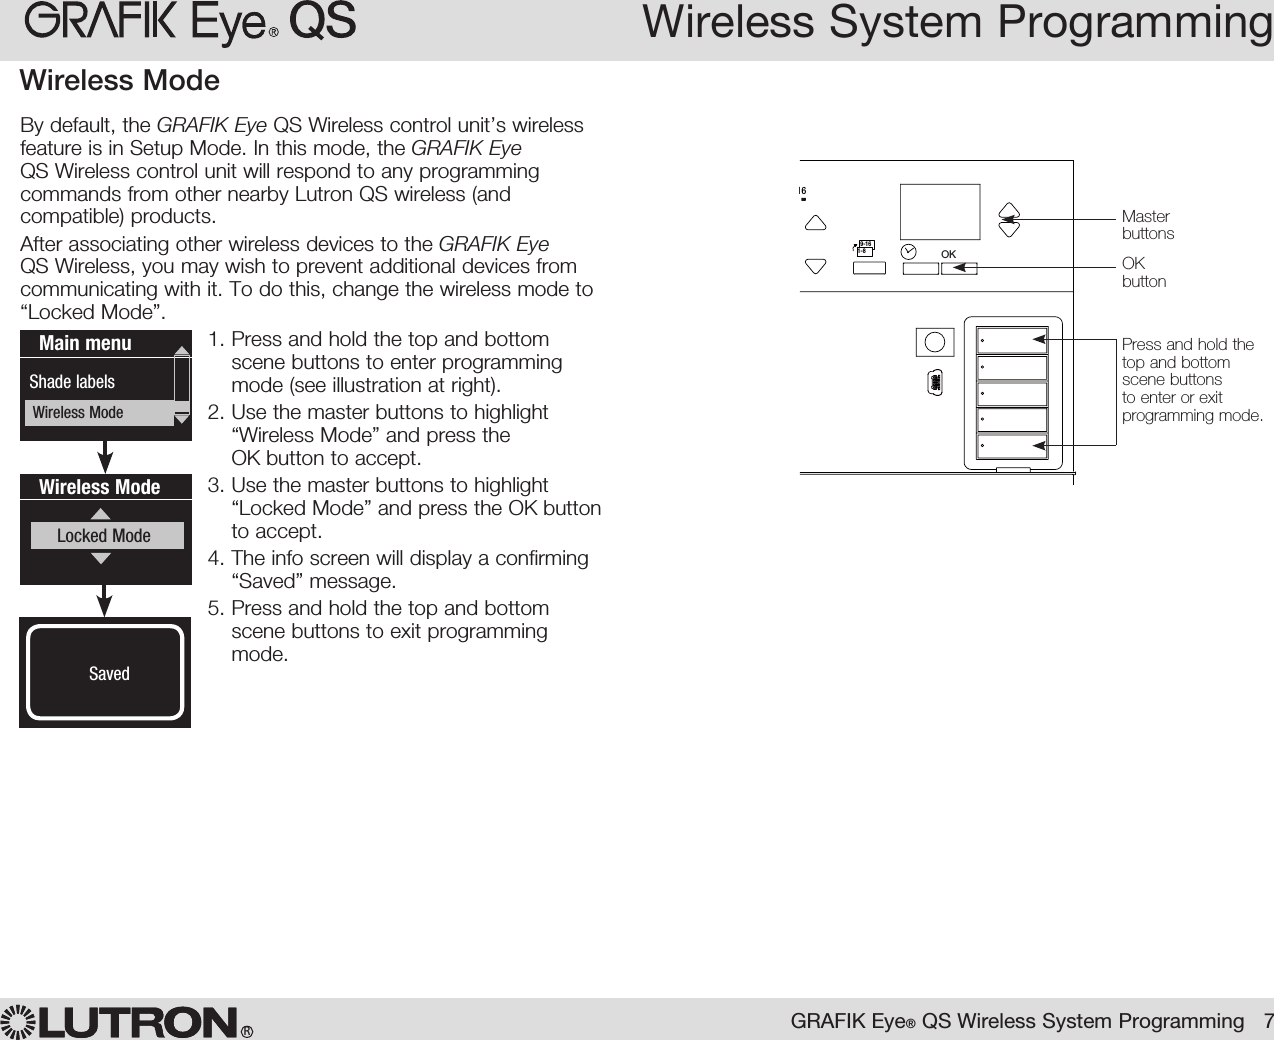 Wireless System ProgrammingWireless Mode  By default, the GRAFIK Eye QS Wireless control unit’s wireless feature is in Setup Mode. In this mode, the GRAFIK Eye QS Wireless control unit will respond to any programming commands from other nearby Lutron QS wireless (and compatible) products.  After associating other wireless devices to the GRAFIK Eye QS Wireless, you may wish to prevent additional devices from communicating with it. To do this, change the wireless mode to “Locked Mode”.1.  Press and hold the top and bottom scene buttons to enter programming mode (see illustration at right).2.  Use the master buttons to highlight “Wireless Mode” and press the OK button to accept.3.  Use the master buttons to highlight “Locked Mode” and press the OK button to accept.4.  The info screen will display a confirming “Saved” message.5.  Press and hold the top and bottom scene buttons to exit programming mode.Wireless ModeLocked ModeSavedSavedMain menuShade labelsWireless ModeOK1 2 34569 10 11 12 13 14 7815 169-161-8Master buttonsOK  buttonPress and hold the top and bottom scene buttons to enter or exit programming mode.GRAFIK Eye® QS Wireless System Programming   7R